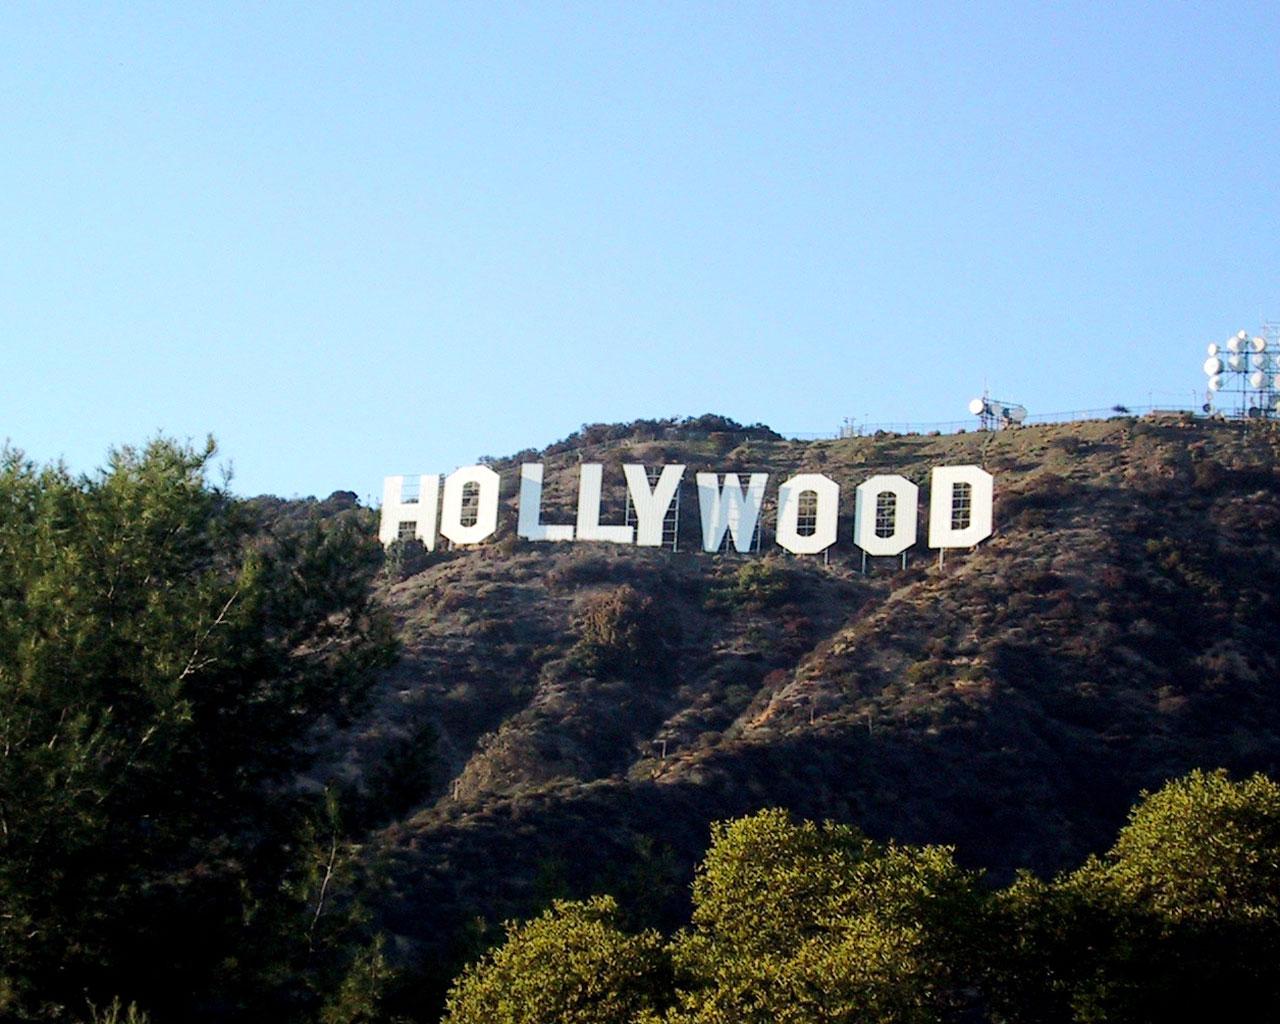 Full Hd Images Collection Of Hollywood Sign - Hollywood Sign - HD Wallpaper 